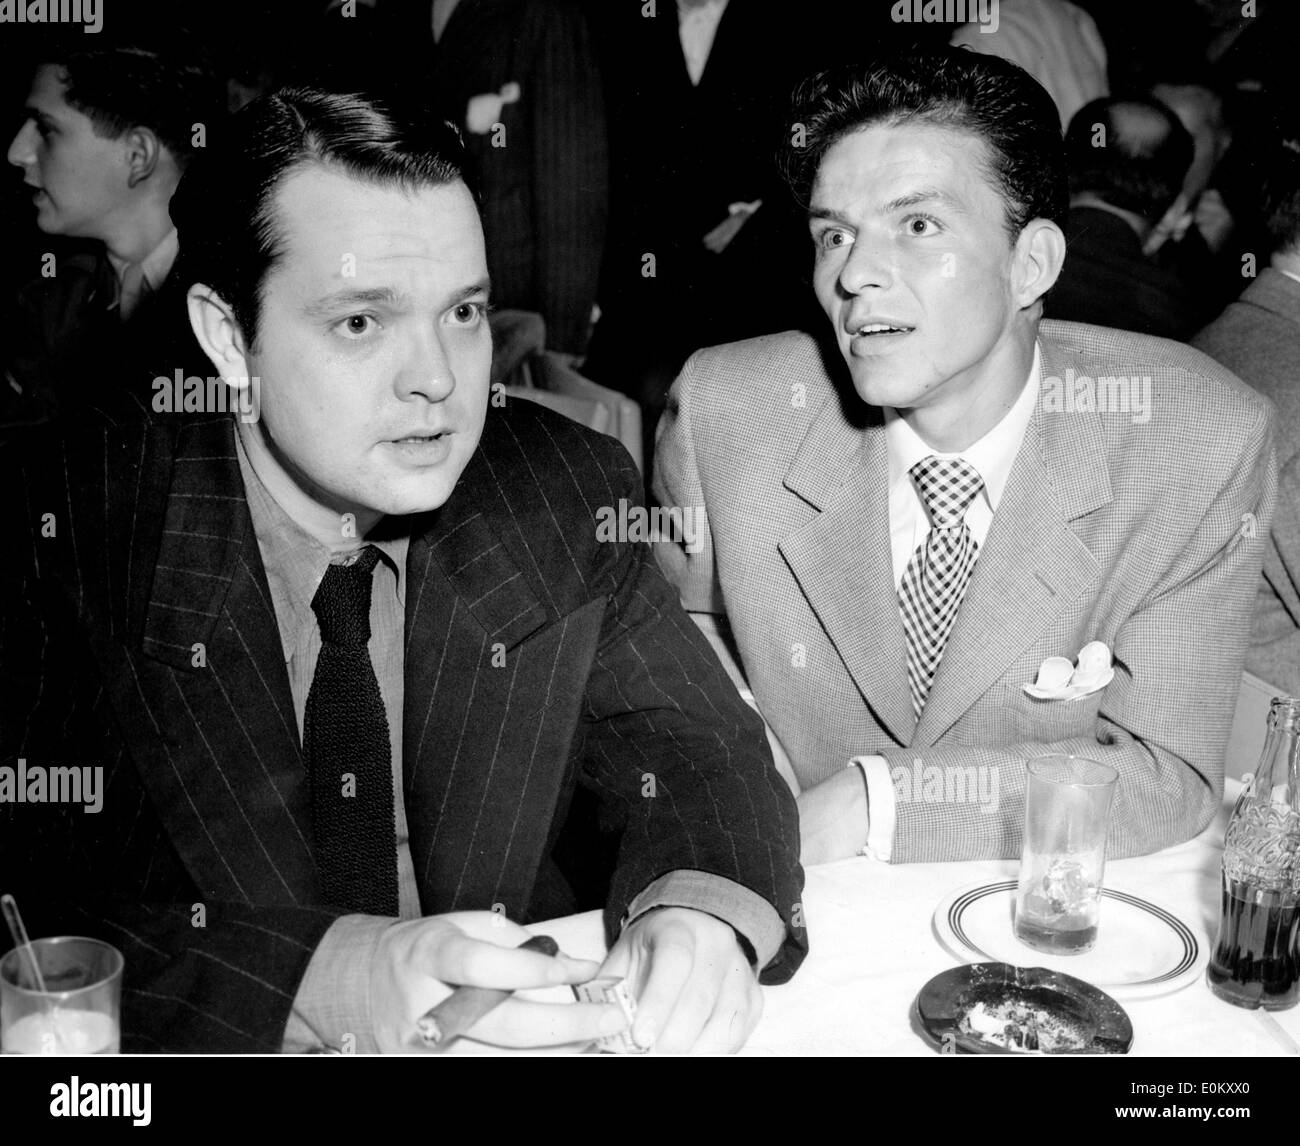 Singer Frank Sinatra and actor Orson Welles at an event Stock Photo